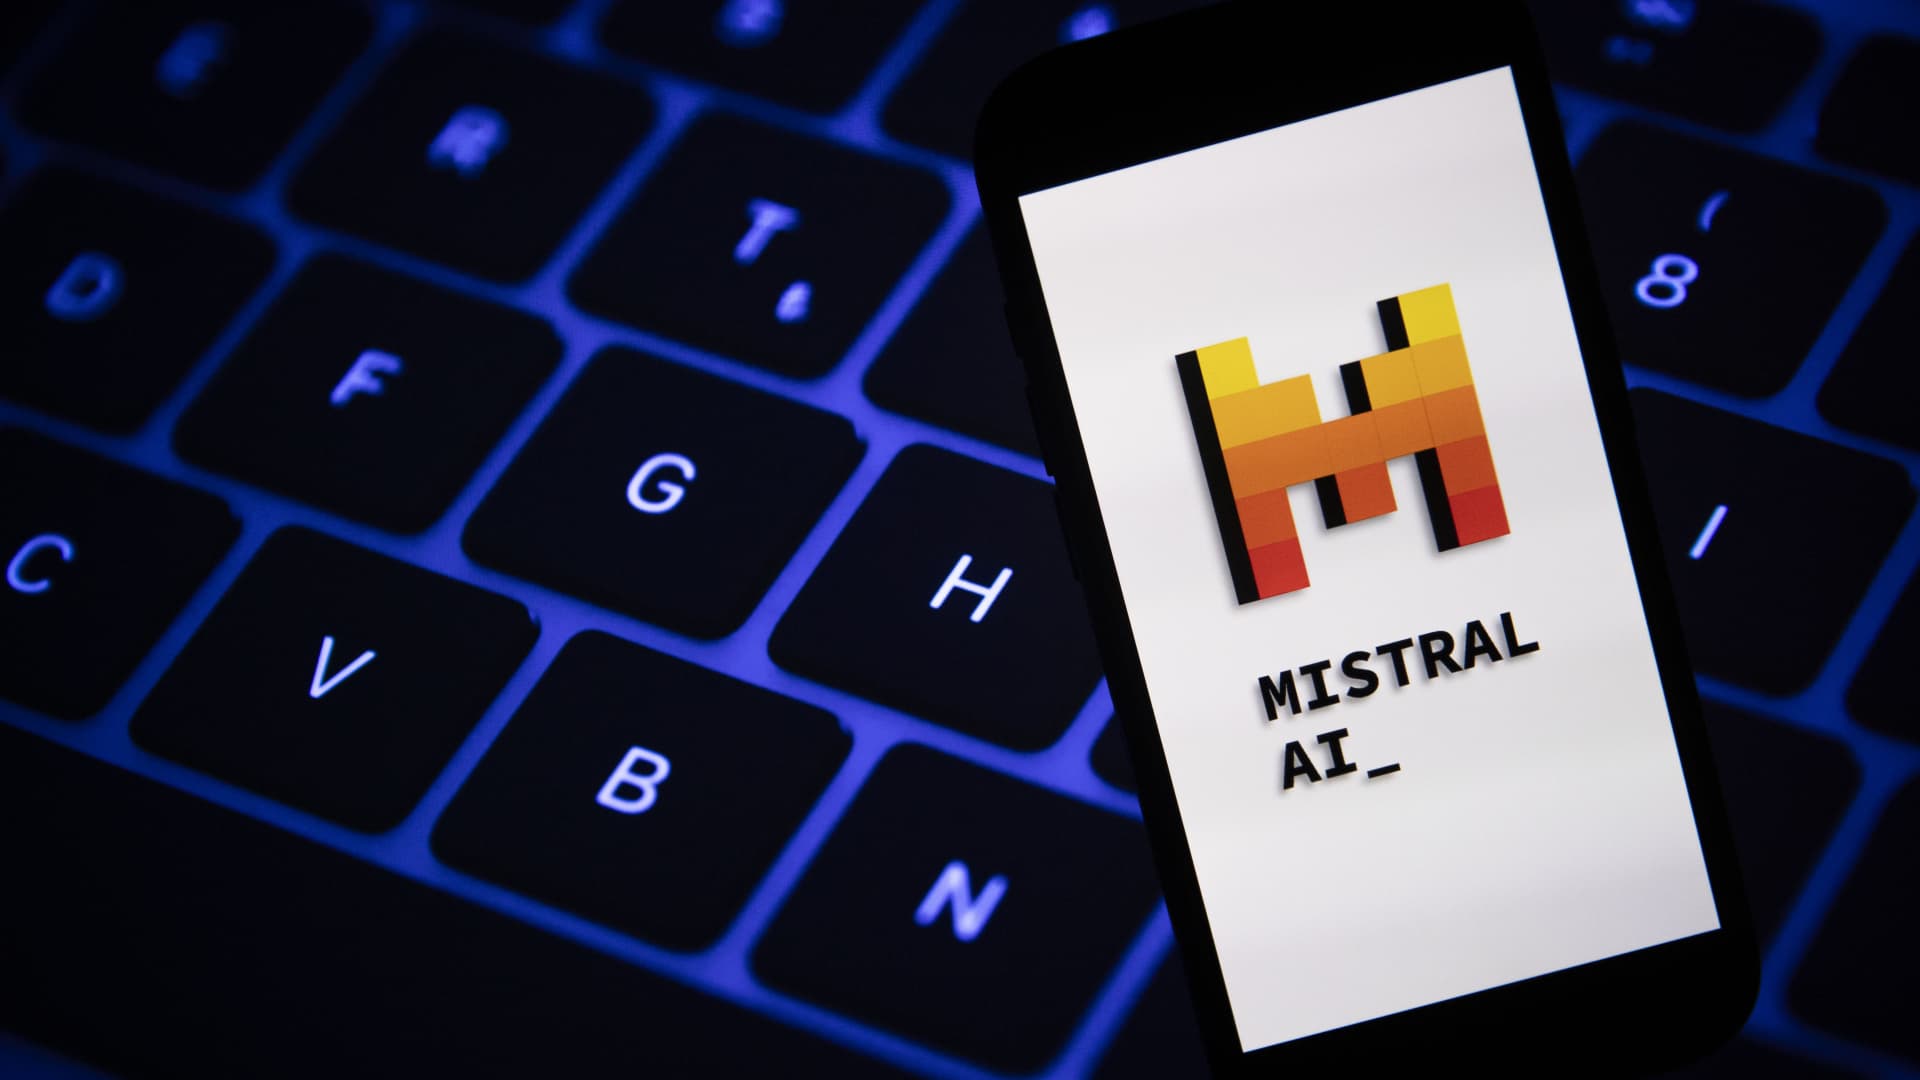 Microsoft invests in Europe's Mistral AI to expand beyond OpenAI